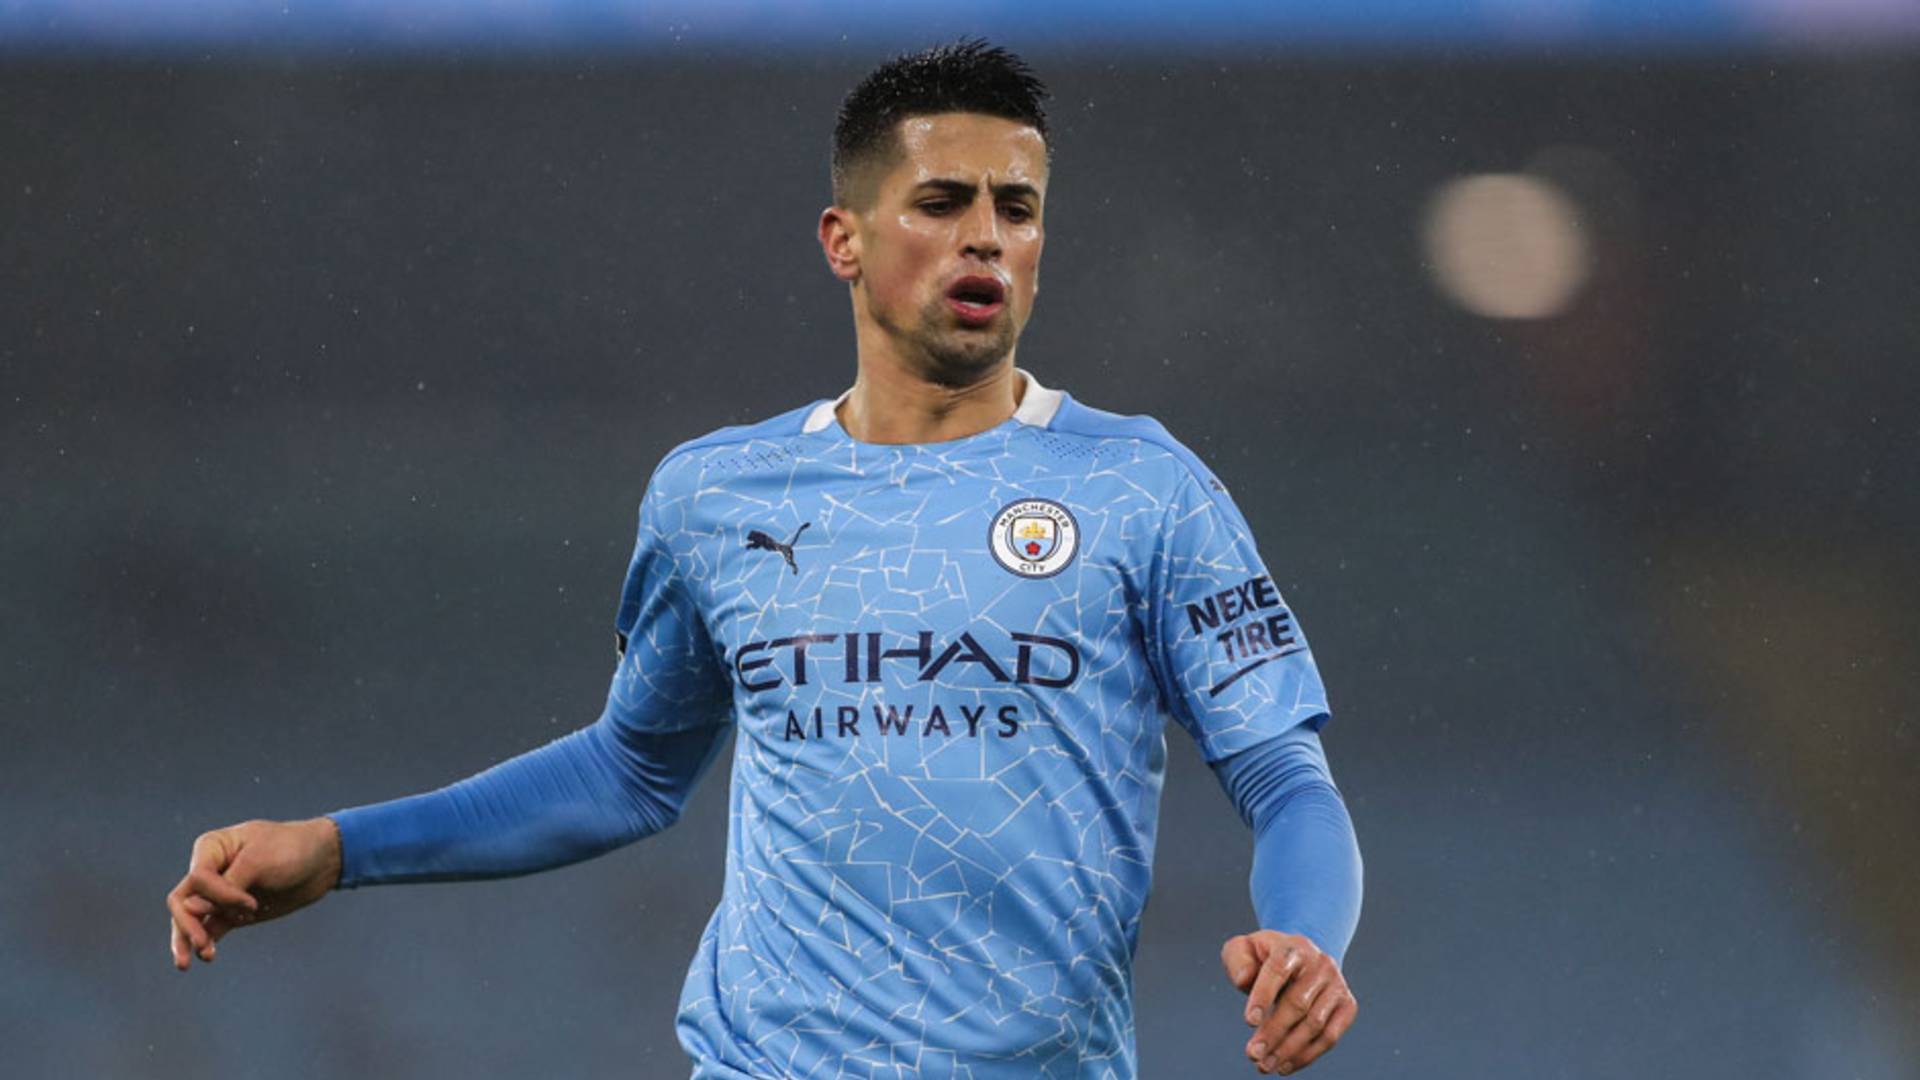 'Pulisic is the most difficult winger I have faced' - Man City's Cancelo heaps praise on 'skilful' Chelsea star